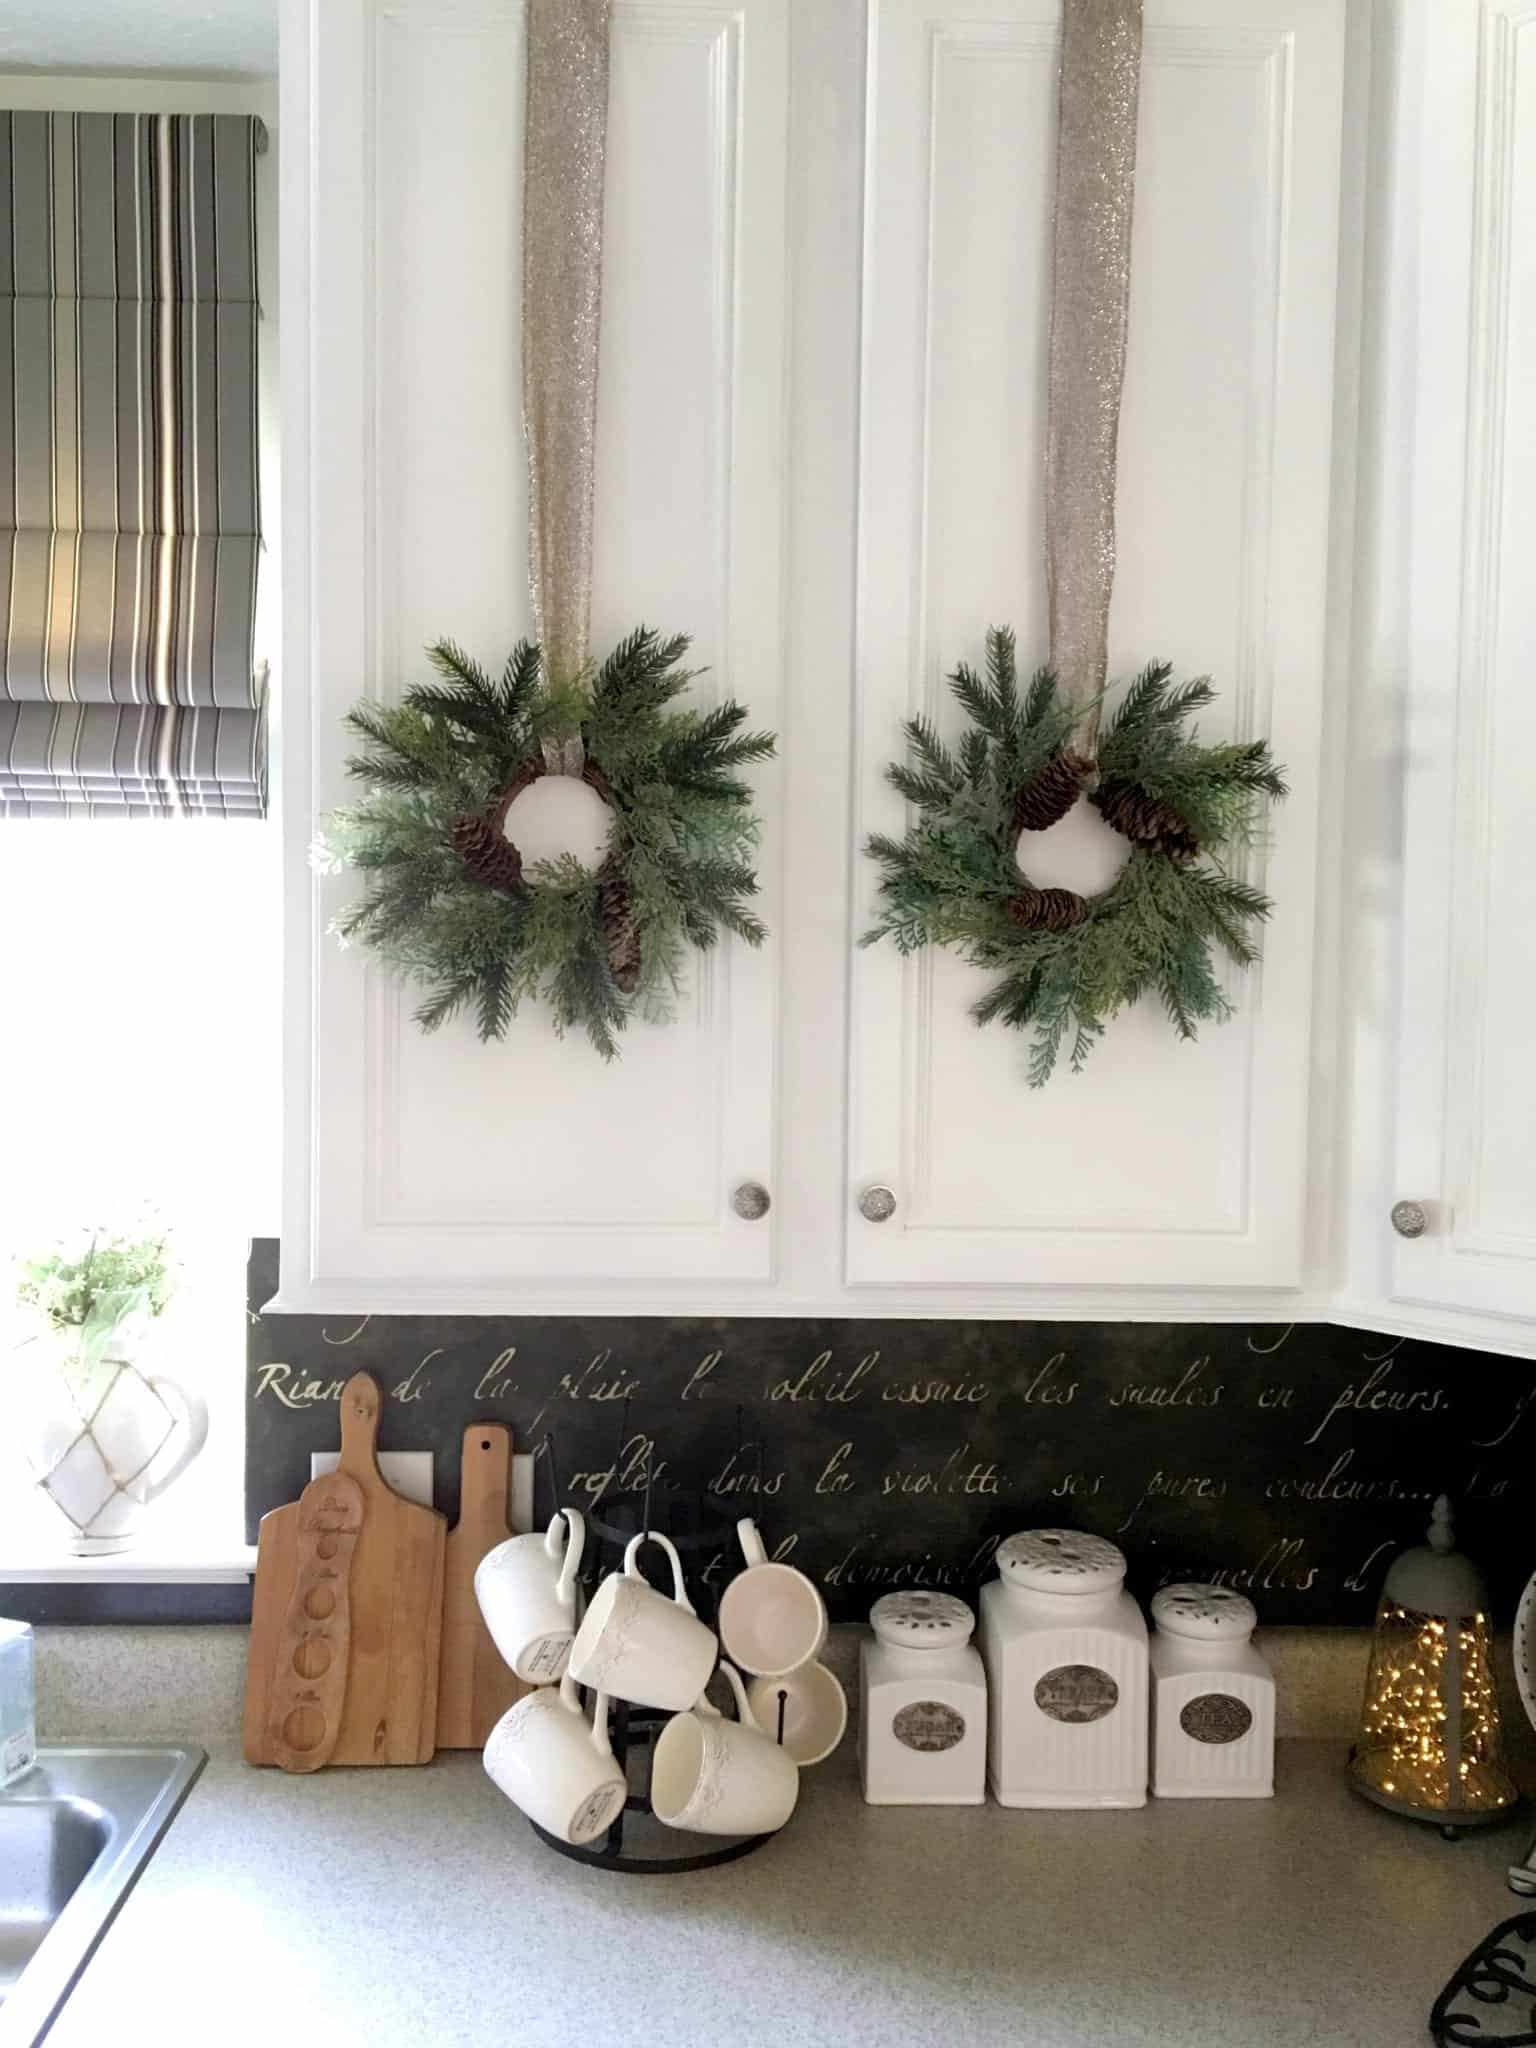 painting-kitchen-cabinets-the-right-way-windowsill-and-wreaths